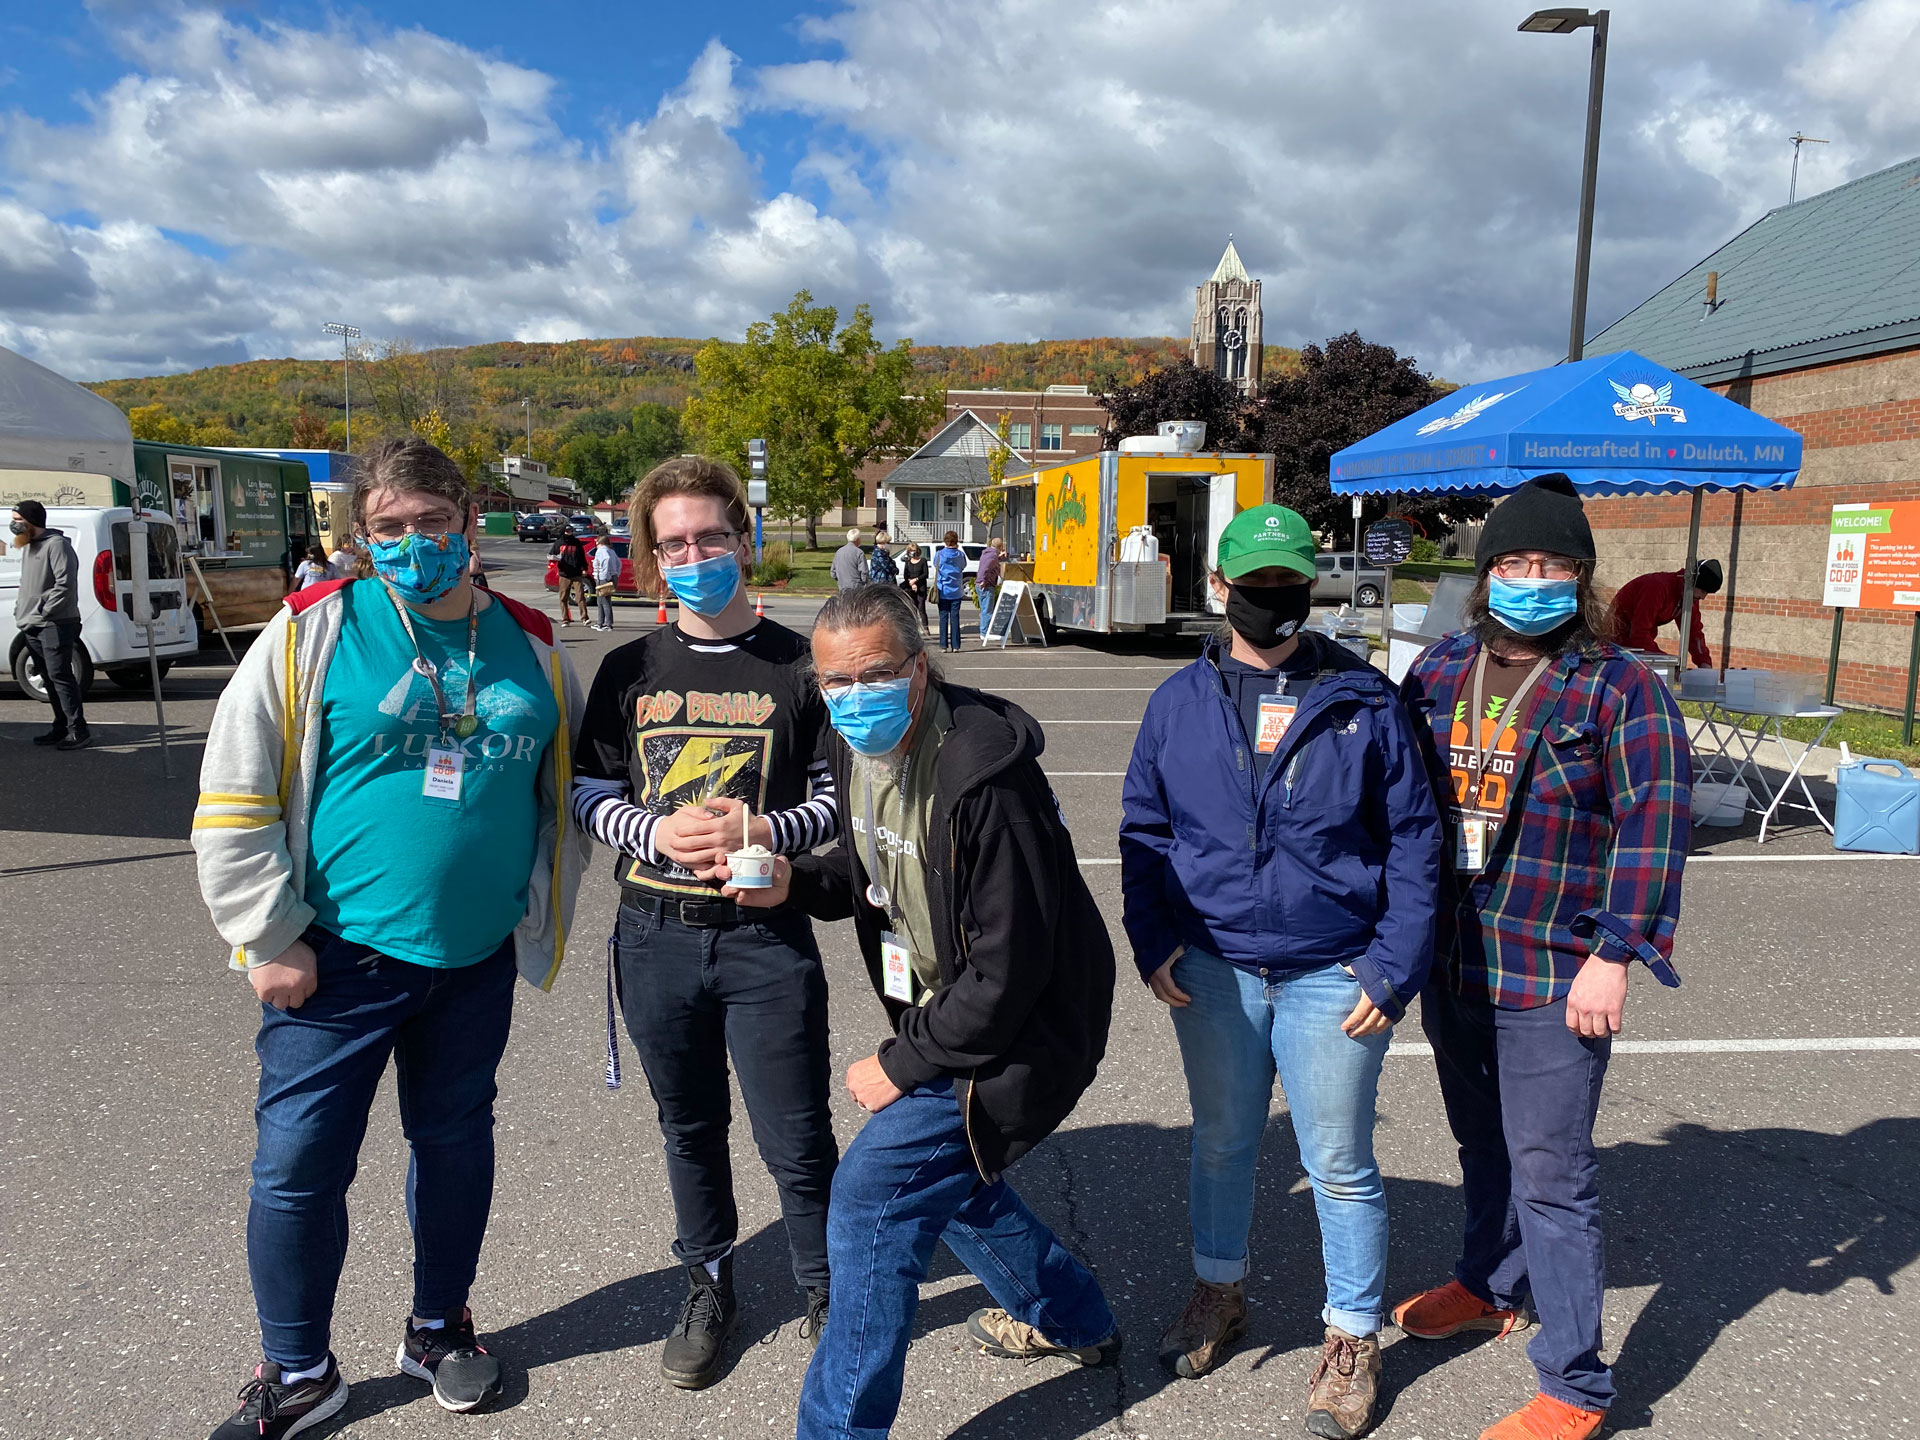 Five people, all wearing face masks, stand outdoors in a parking lot with food trucks and buildings in the background. They are grouped together, with some posing with arms around one another. The sky is partly cloudy, with trees and a hill visible in the distance near Whole Foods Coop Duluth MN.